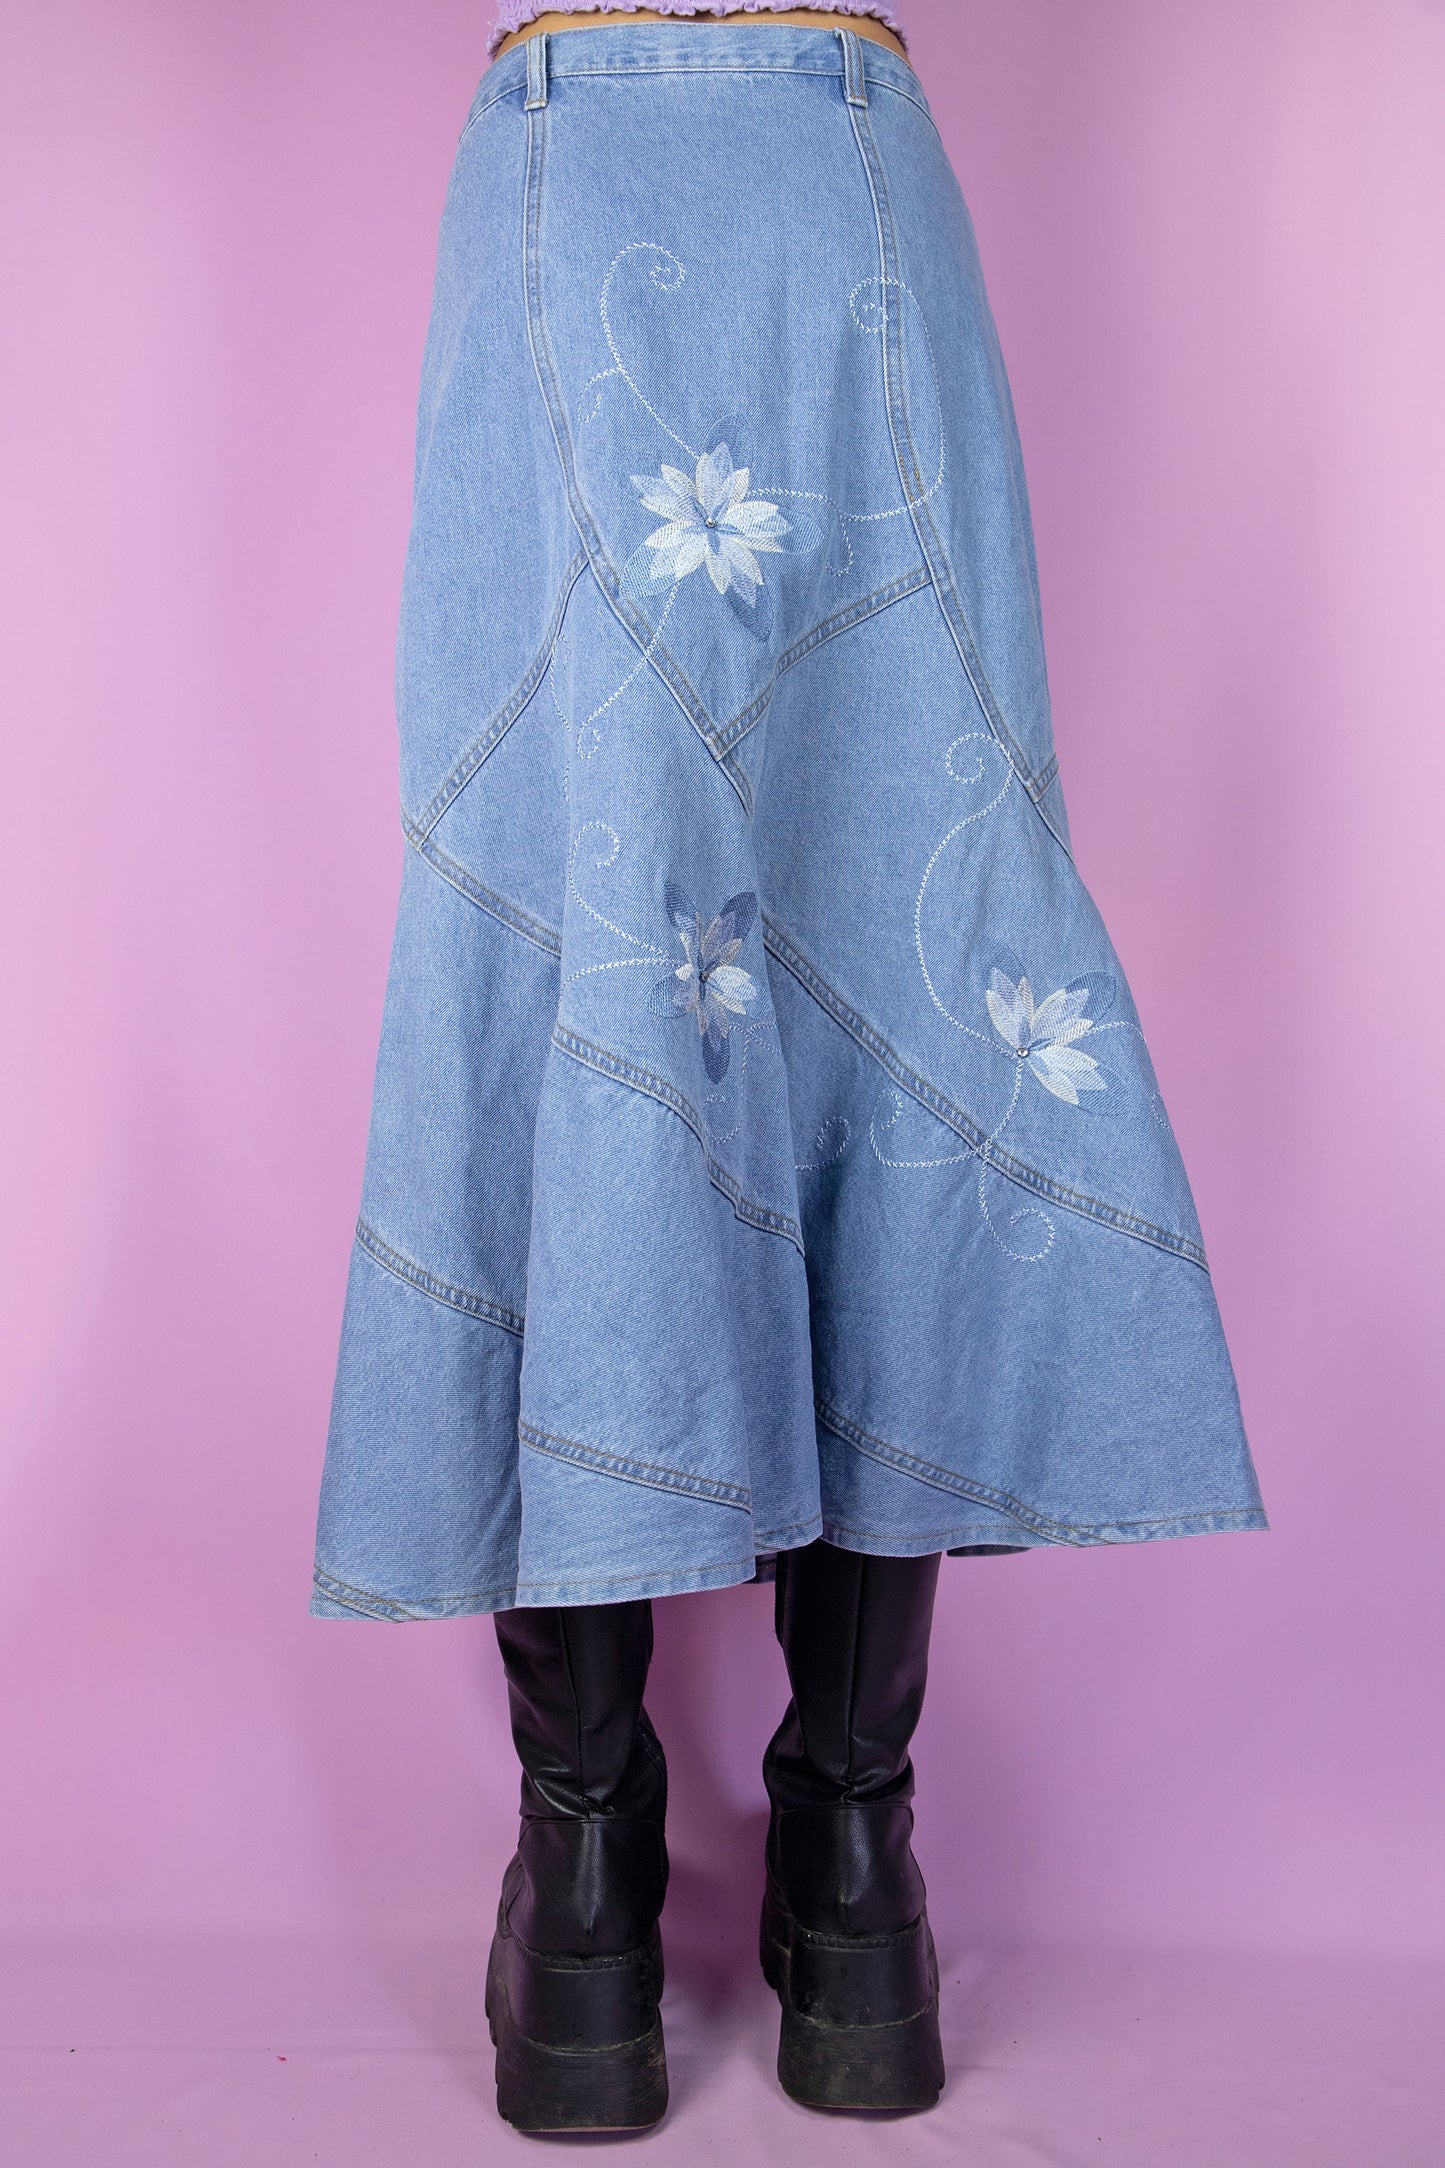 The Y2K Denim Trumpet Midi Skirt is a vintage skirt adorned with embroidered floral details. Cyber grunge 2000s jean maxi skirt.